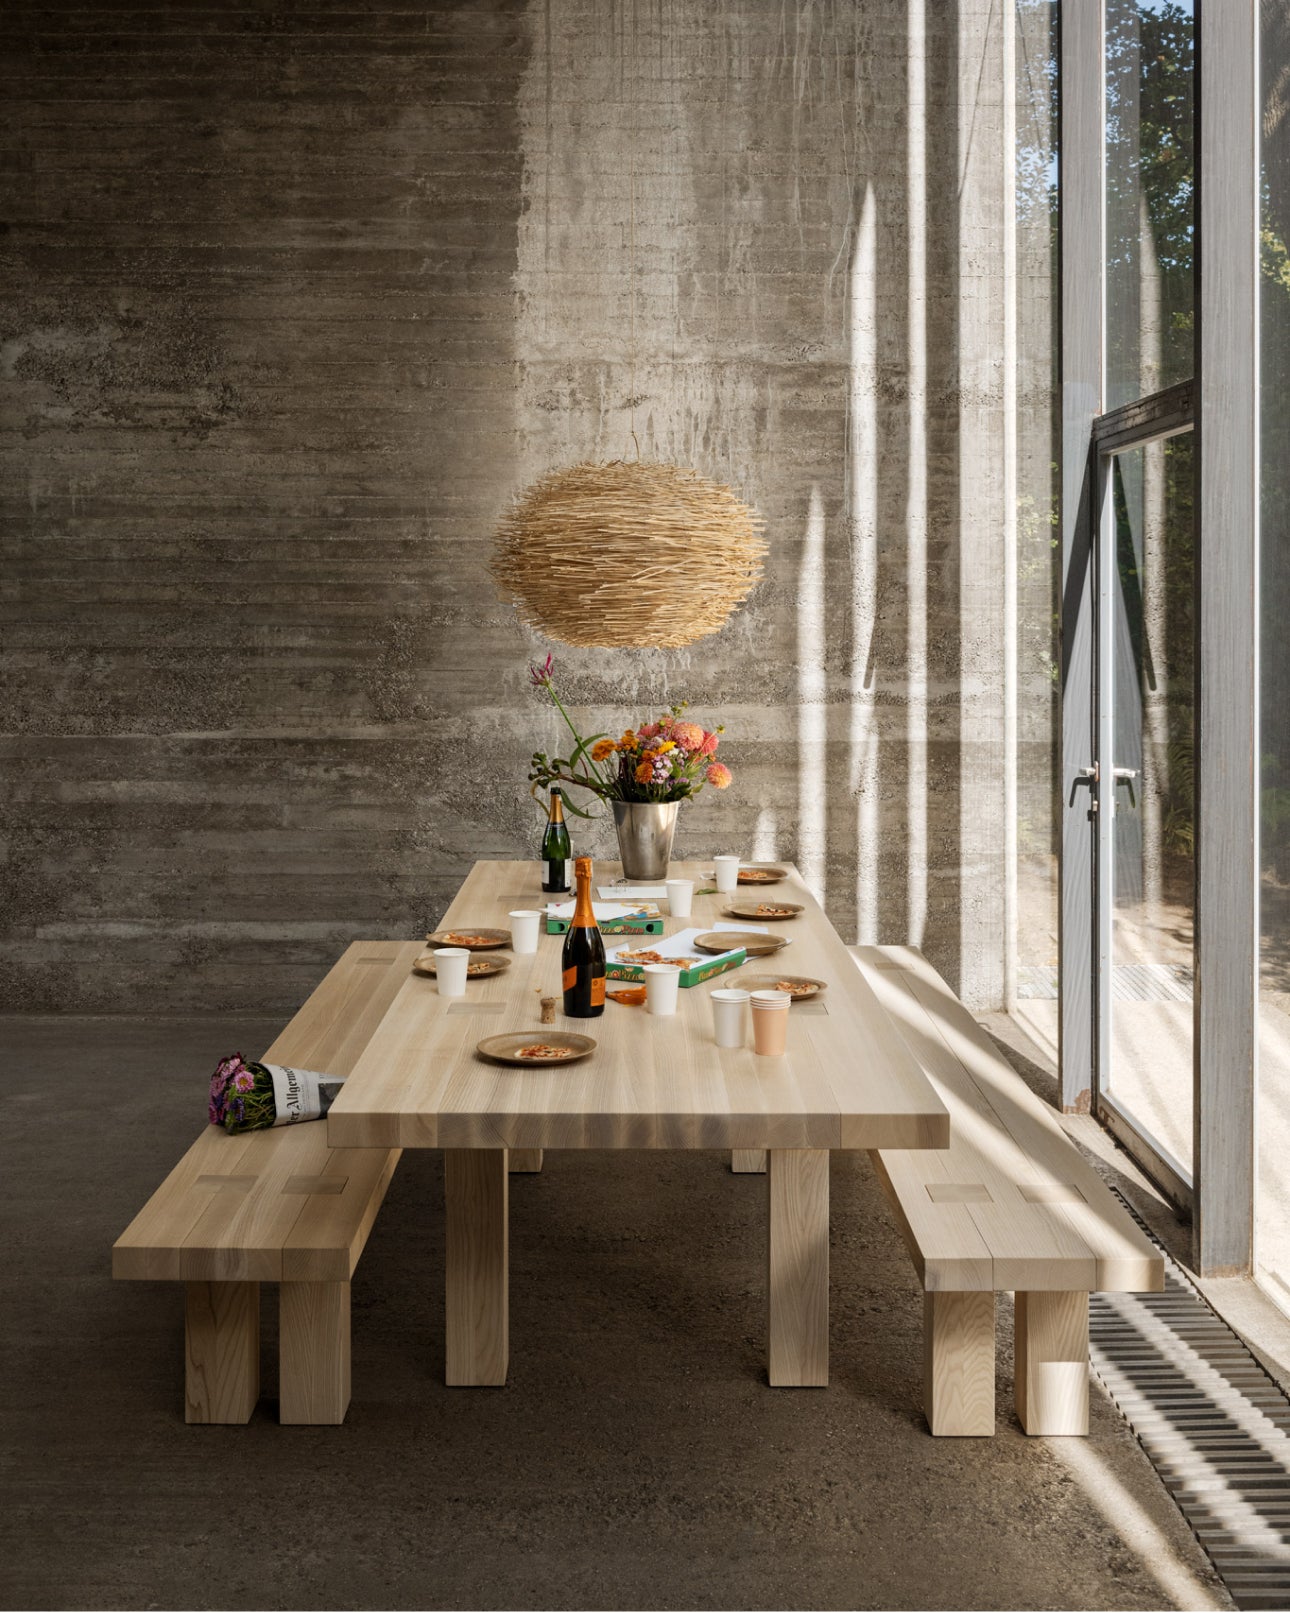 A dining scene featuring a Max Table + Benches Set.